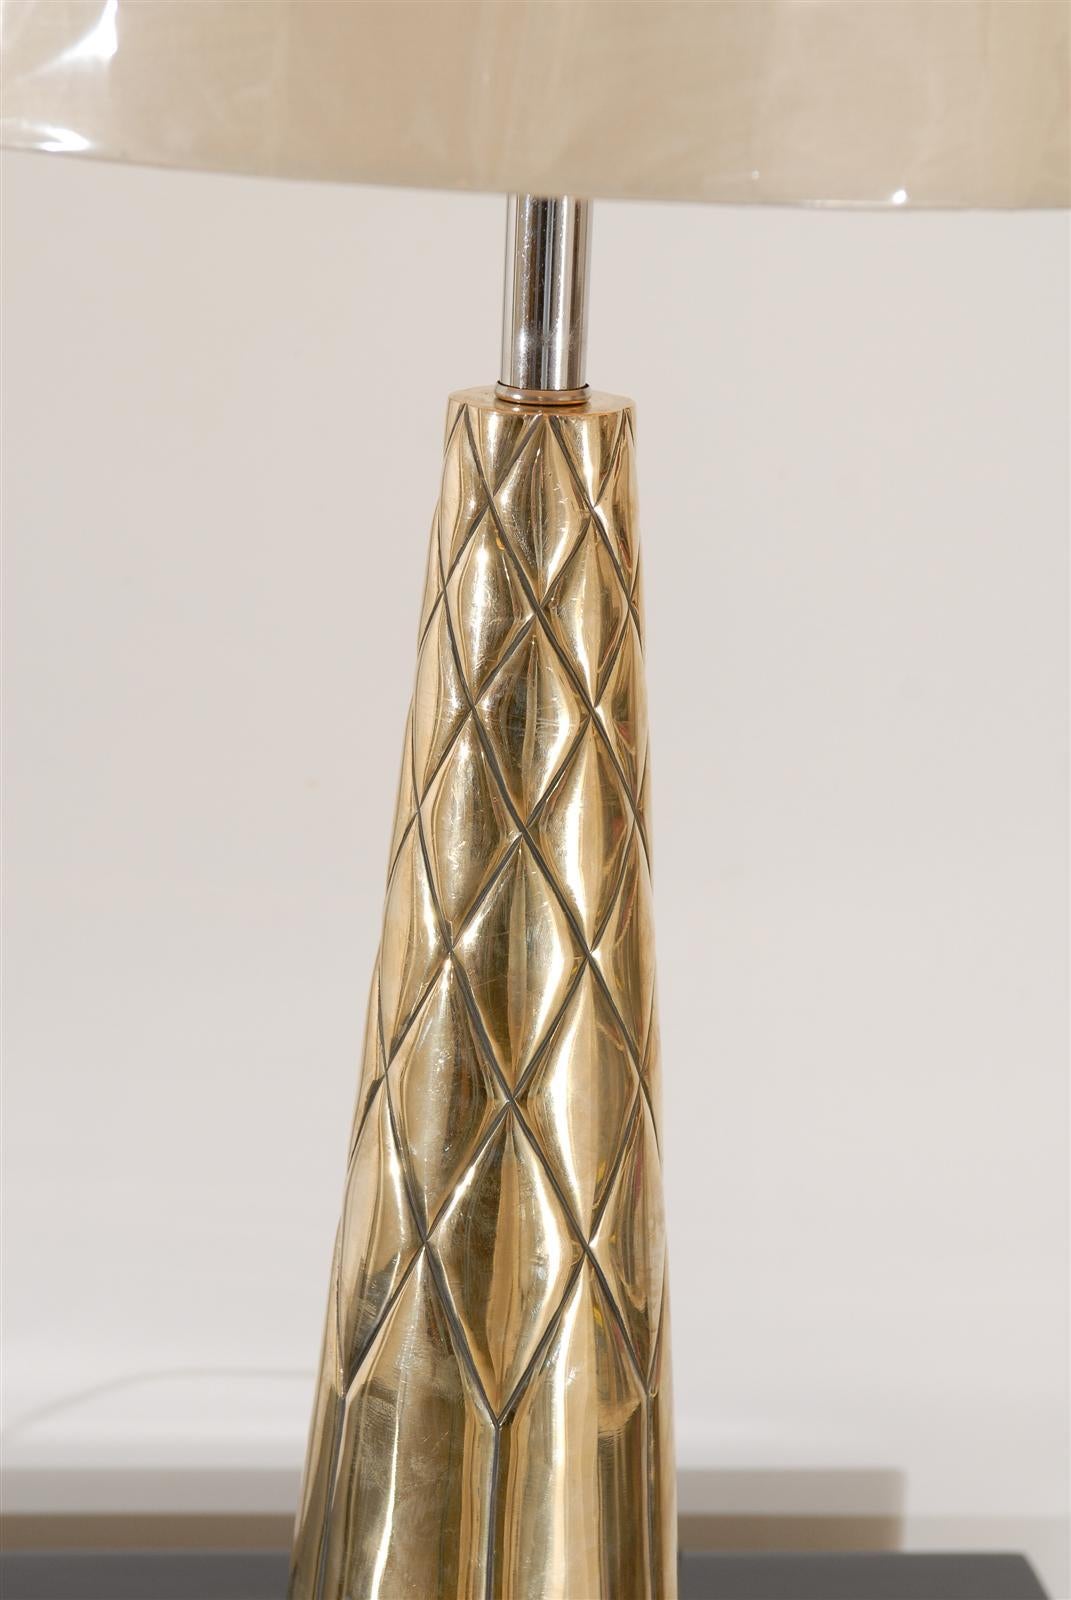 Exquisite Pair of Modern Etched Cone Lamps in Nickel and Brass For Sale 1